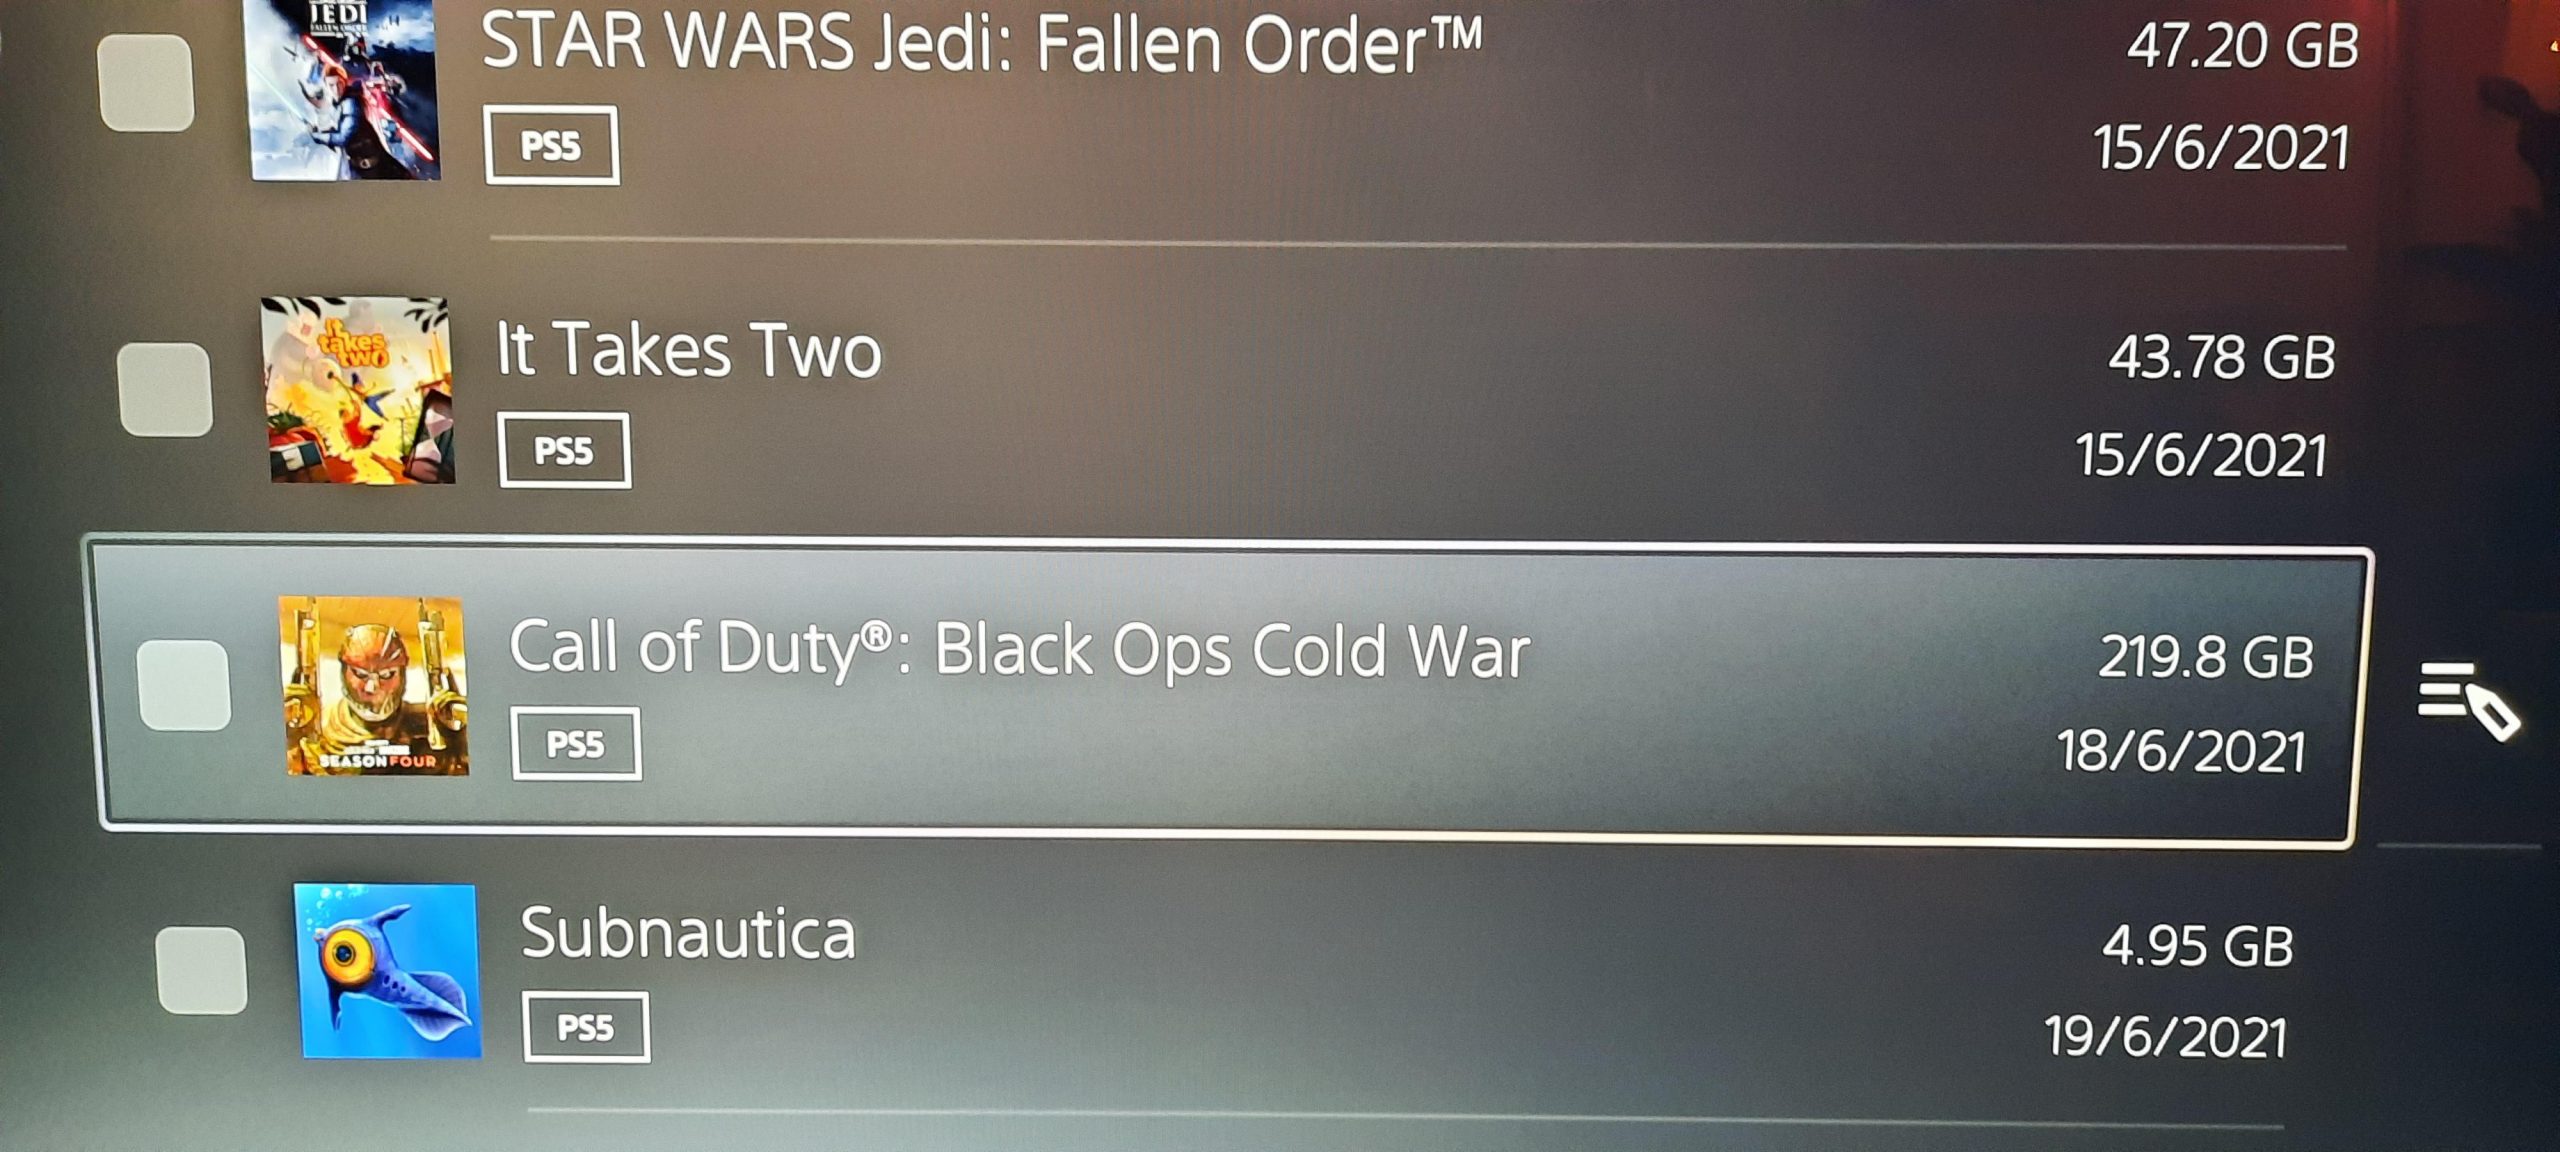 Call of Duty Black Ops Cold War is now over 200 GB on Consoles